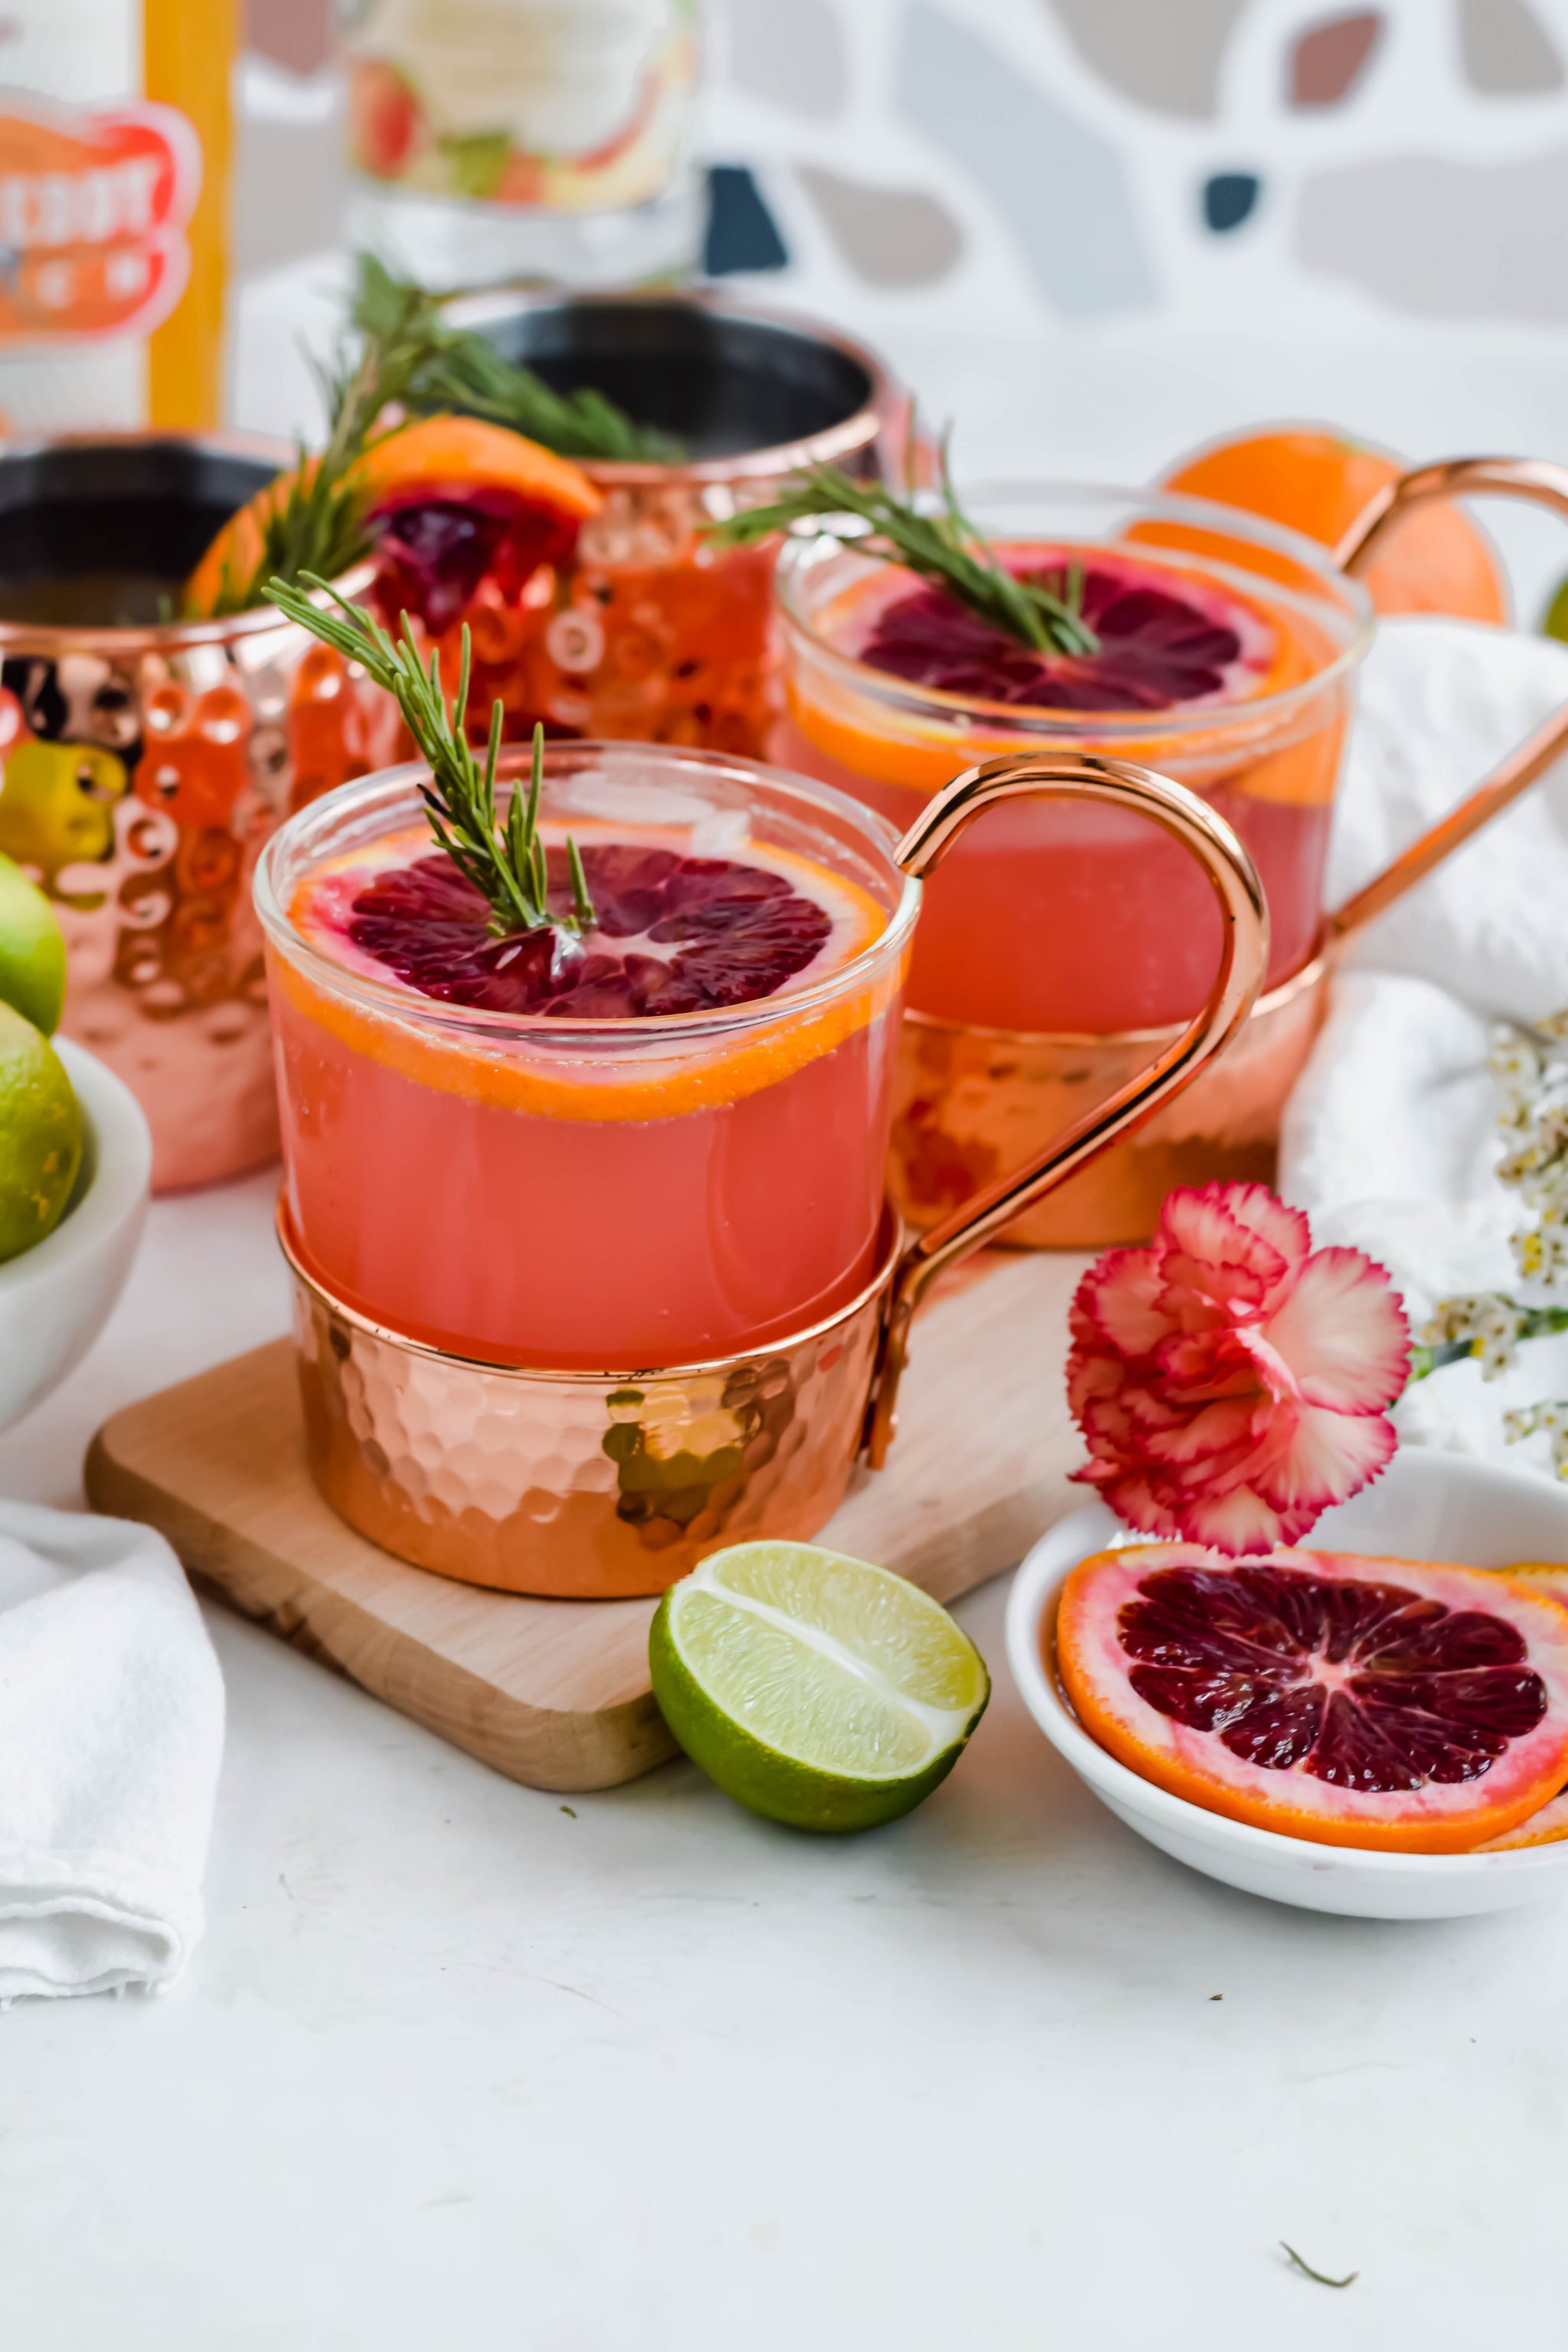 Blood Orange Moscow Mule - A Paige of Positivity